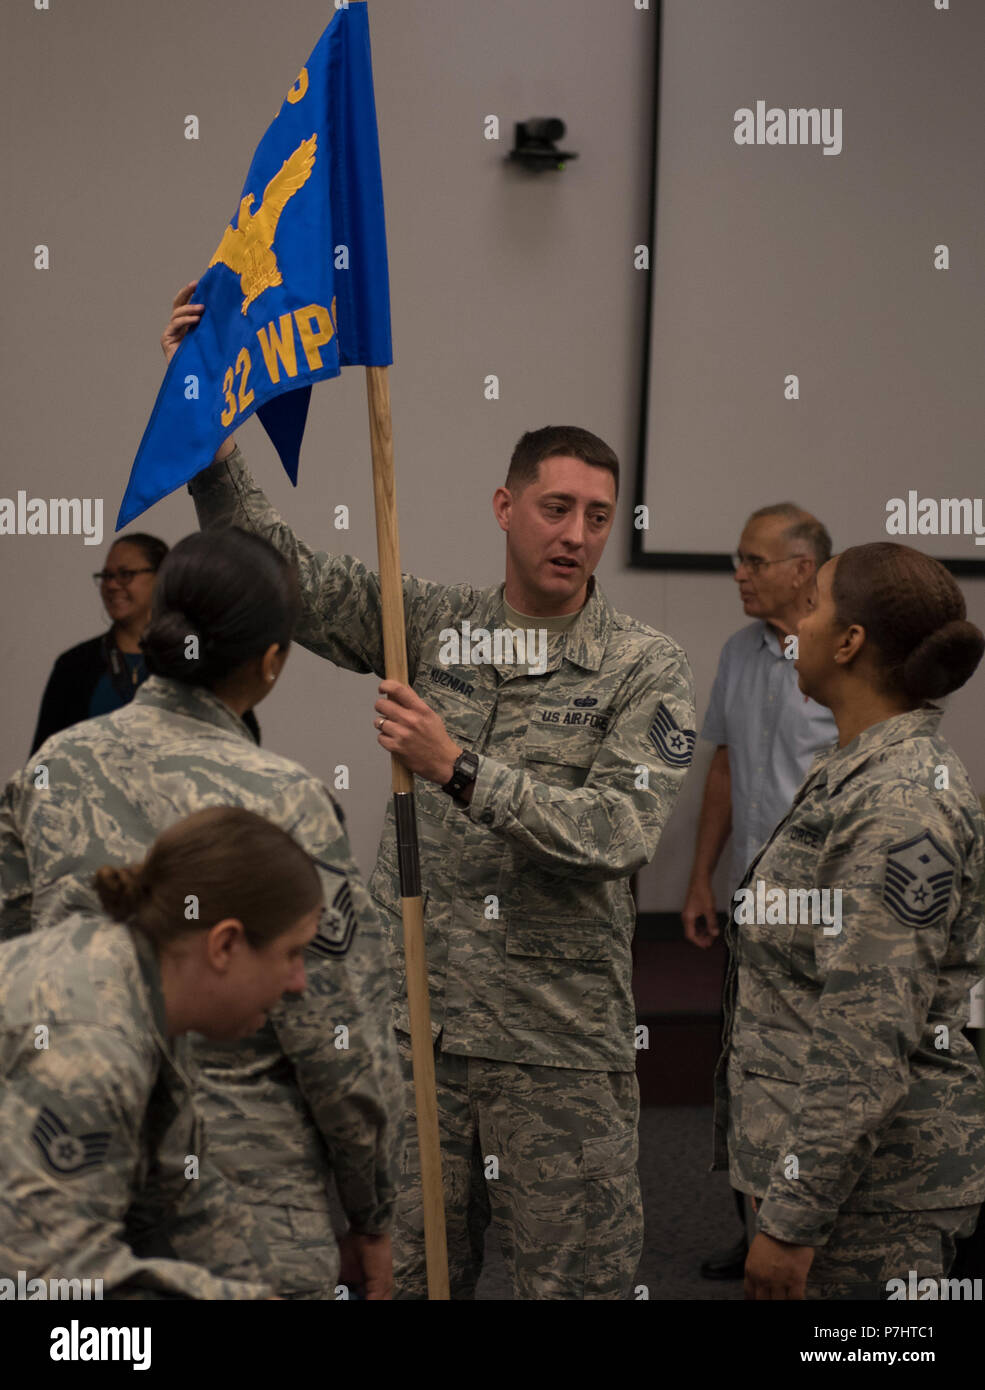 Tech. Sgt. Kieth Kuzniar, 32nd Weapons Squadron superintendent, shows off the new squadron guidon to Master Sgt. Brandi Love, U.S. Air Force Weapons School first sergeant, during an assumption of command ceremony at Nellis Air Force Base, Nevada, June 28, 2018. The 32nd WPS will focus on teaching Cyber Warfare Operations. (U.S. Air Force photo by Airman 1st Class Andrew D. Sarver) Stock Photo